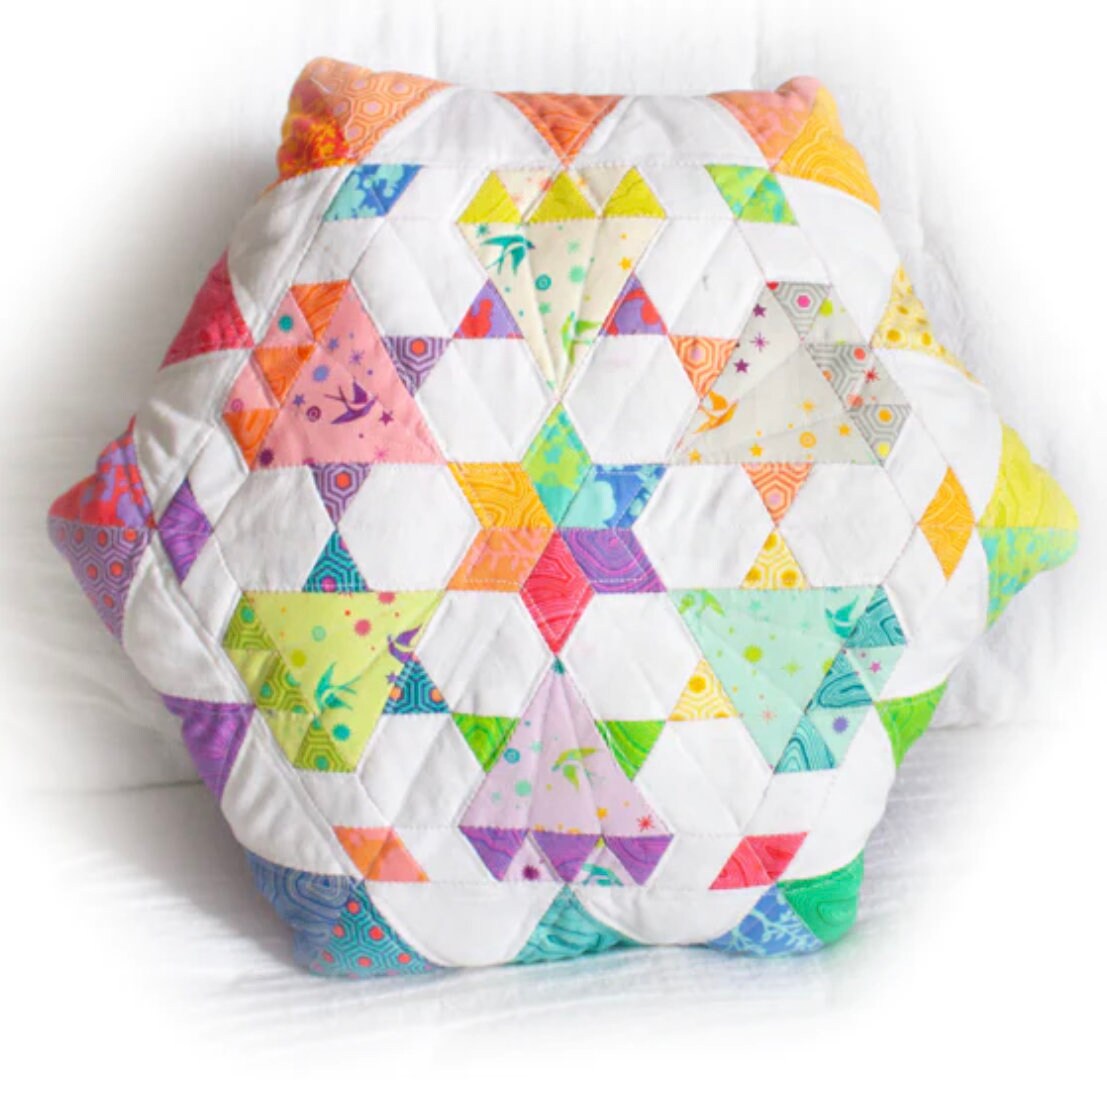 Diamond Dust Pillow by Paper Pieces w/ Acrylic Templates